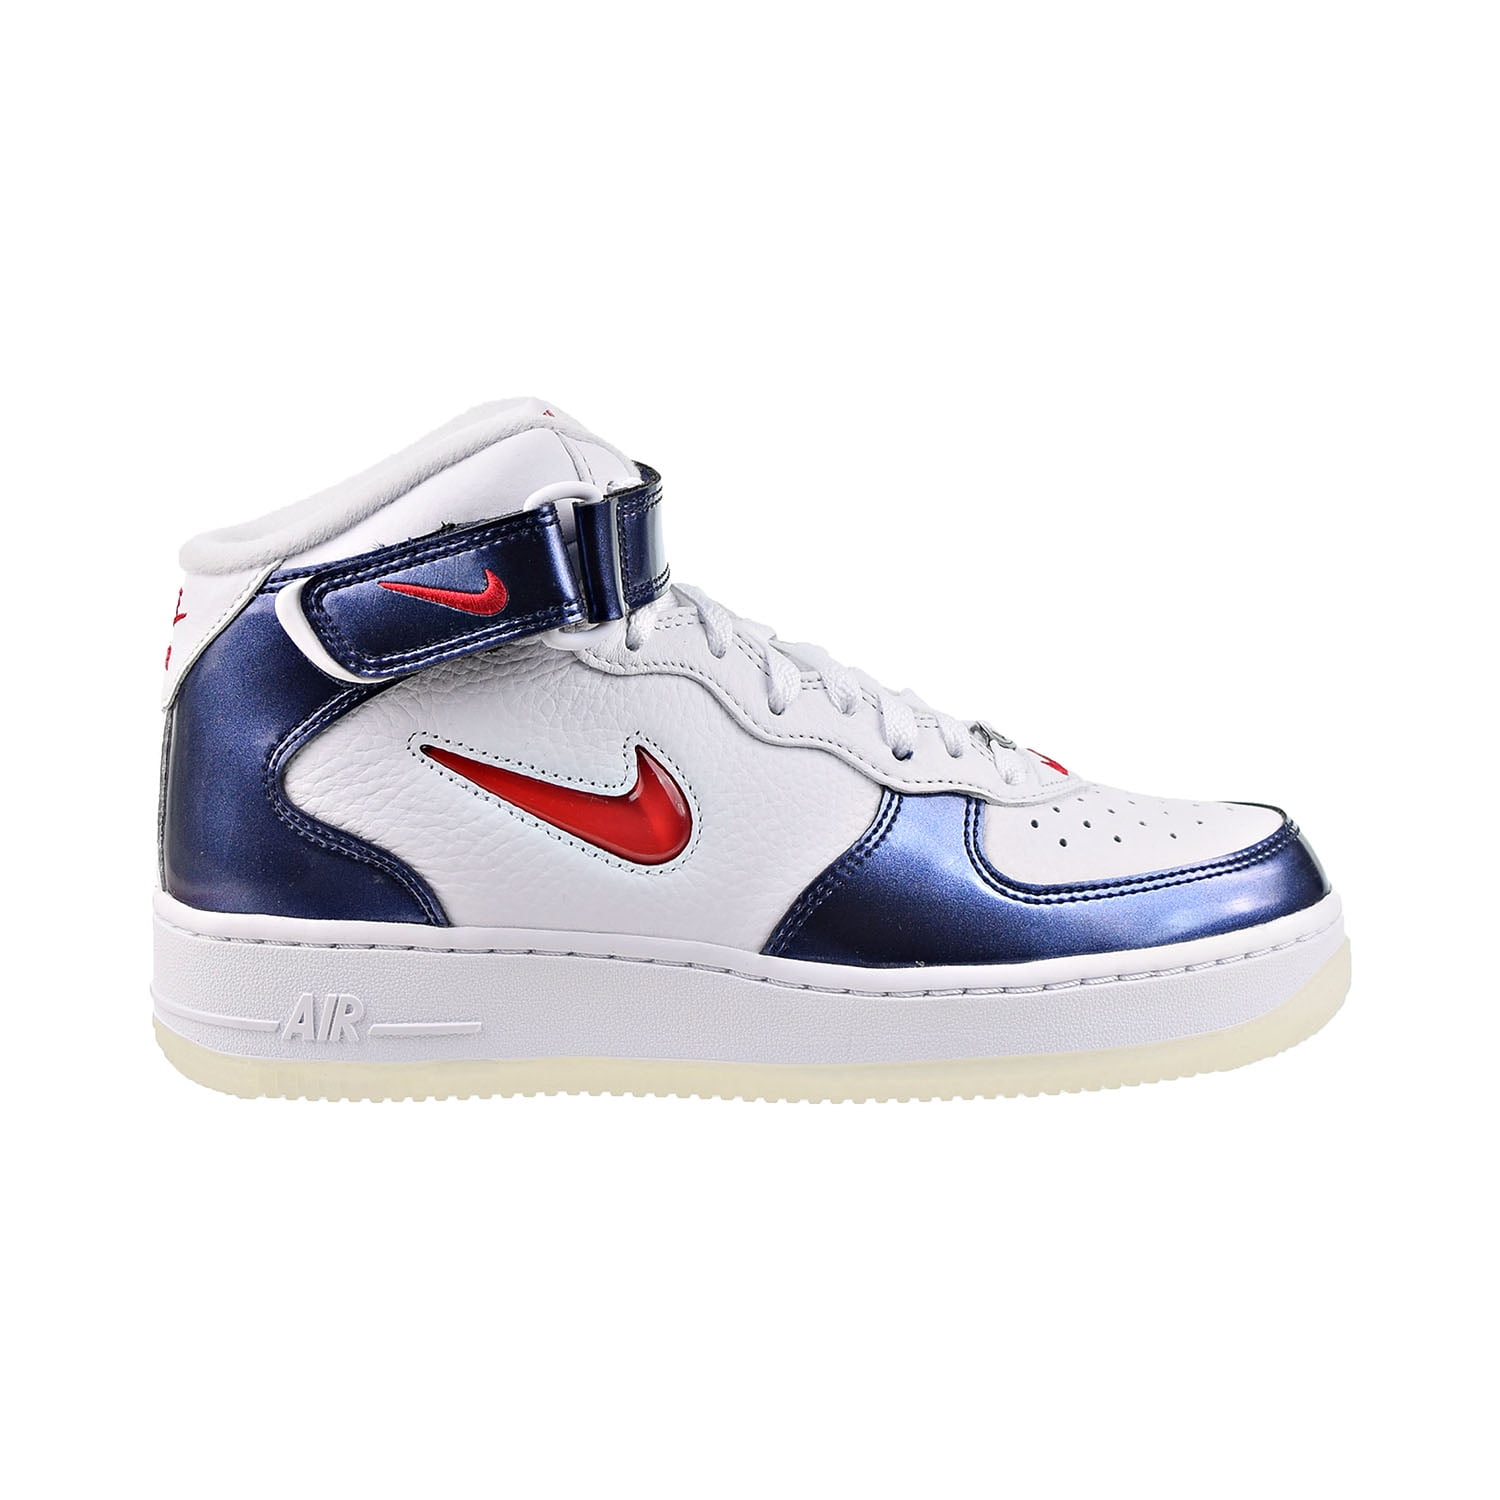 Nike Air Force 1 Mid "Independence Day" Men's Shoes dh5623-101 Walmart.com